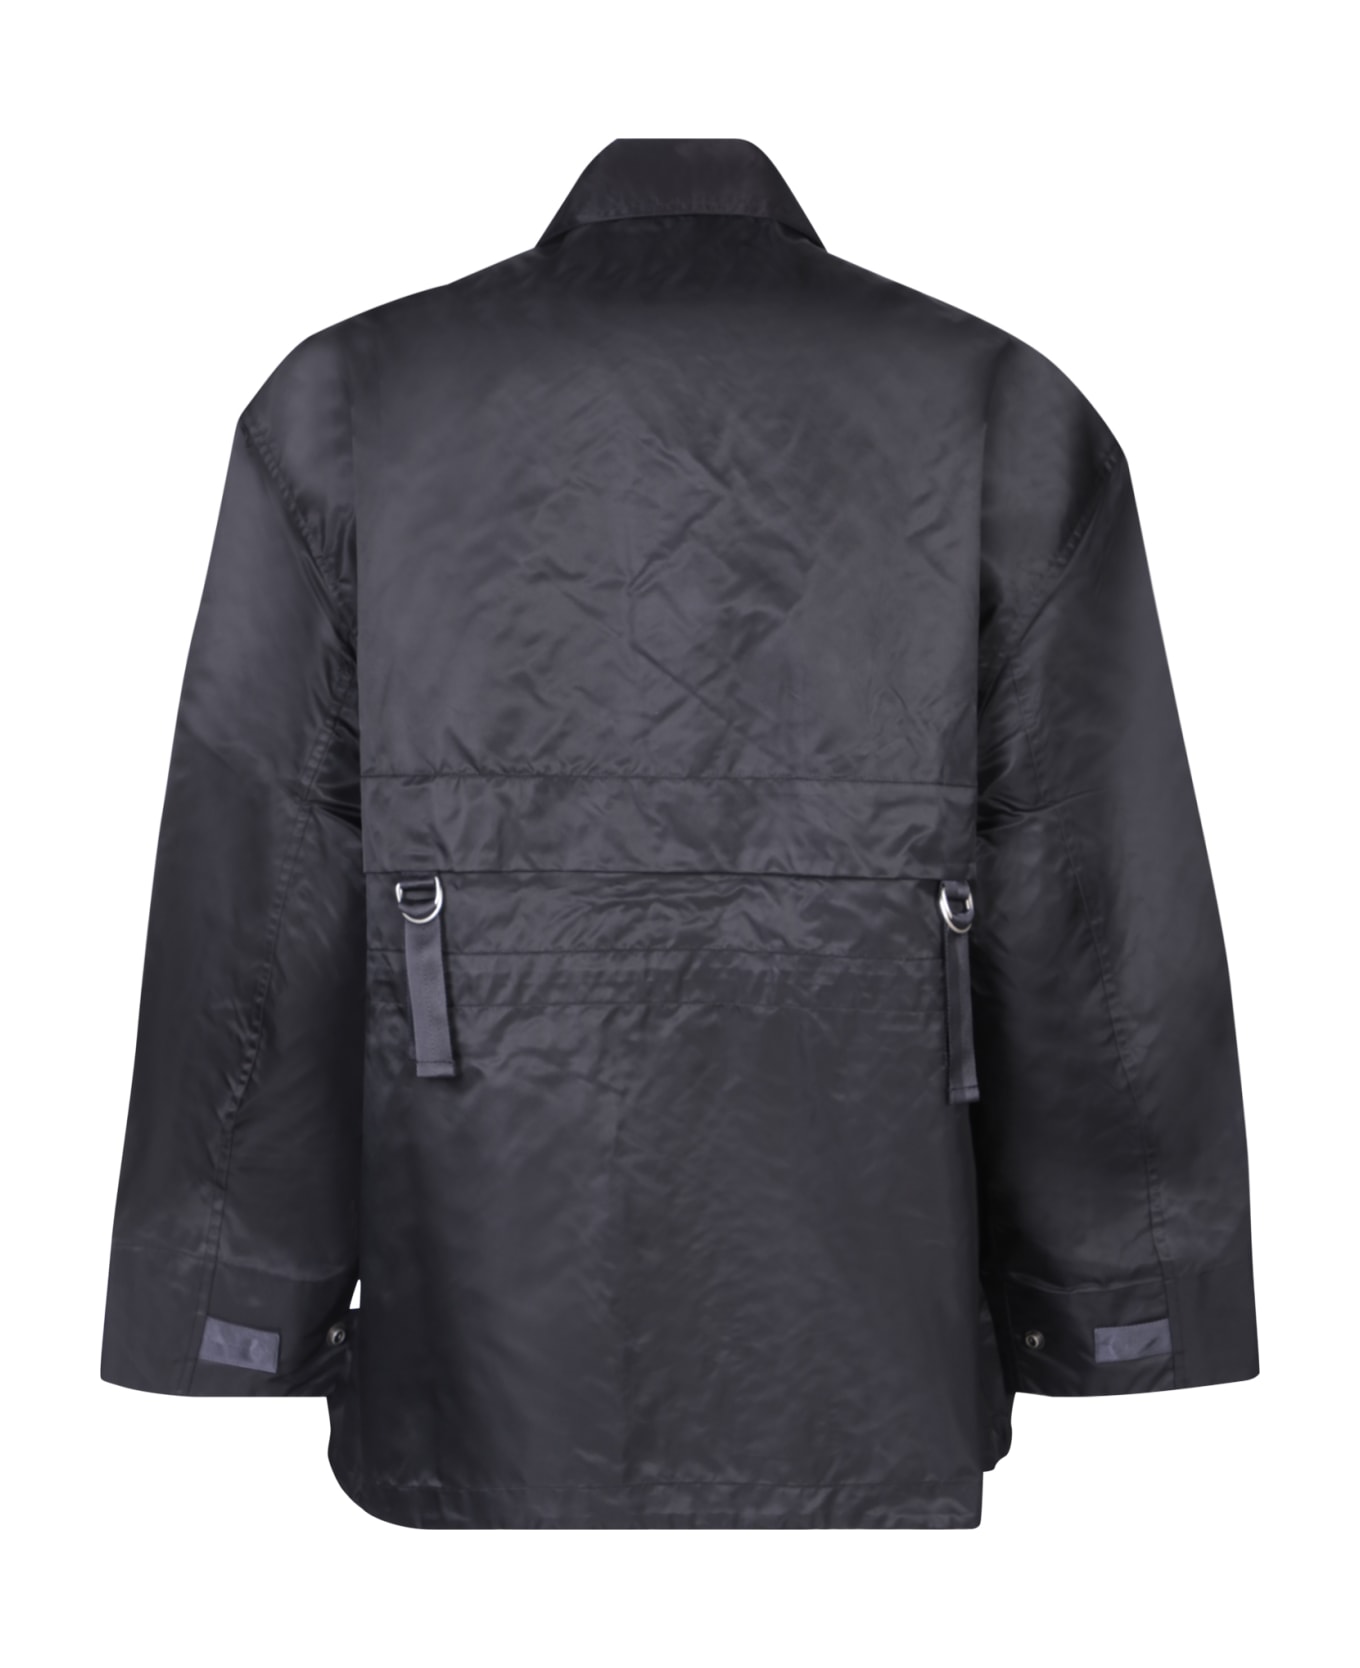 Acne Studios Relaxed Jacket - Black ブレザー